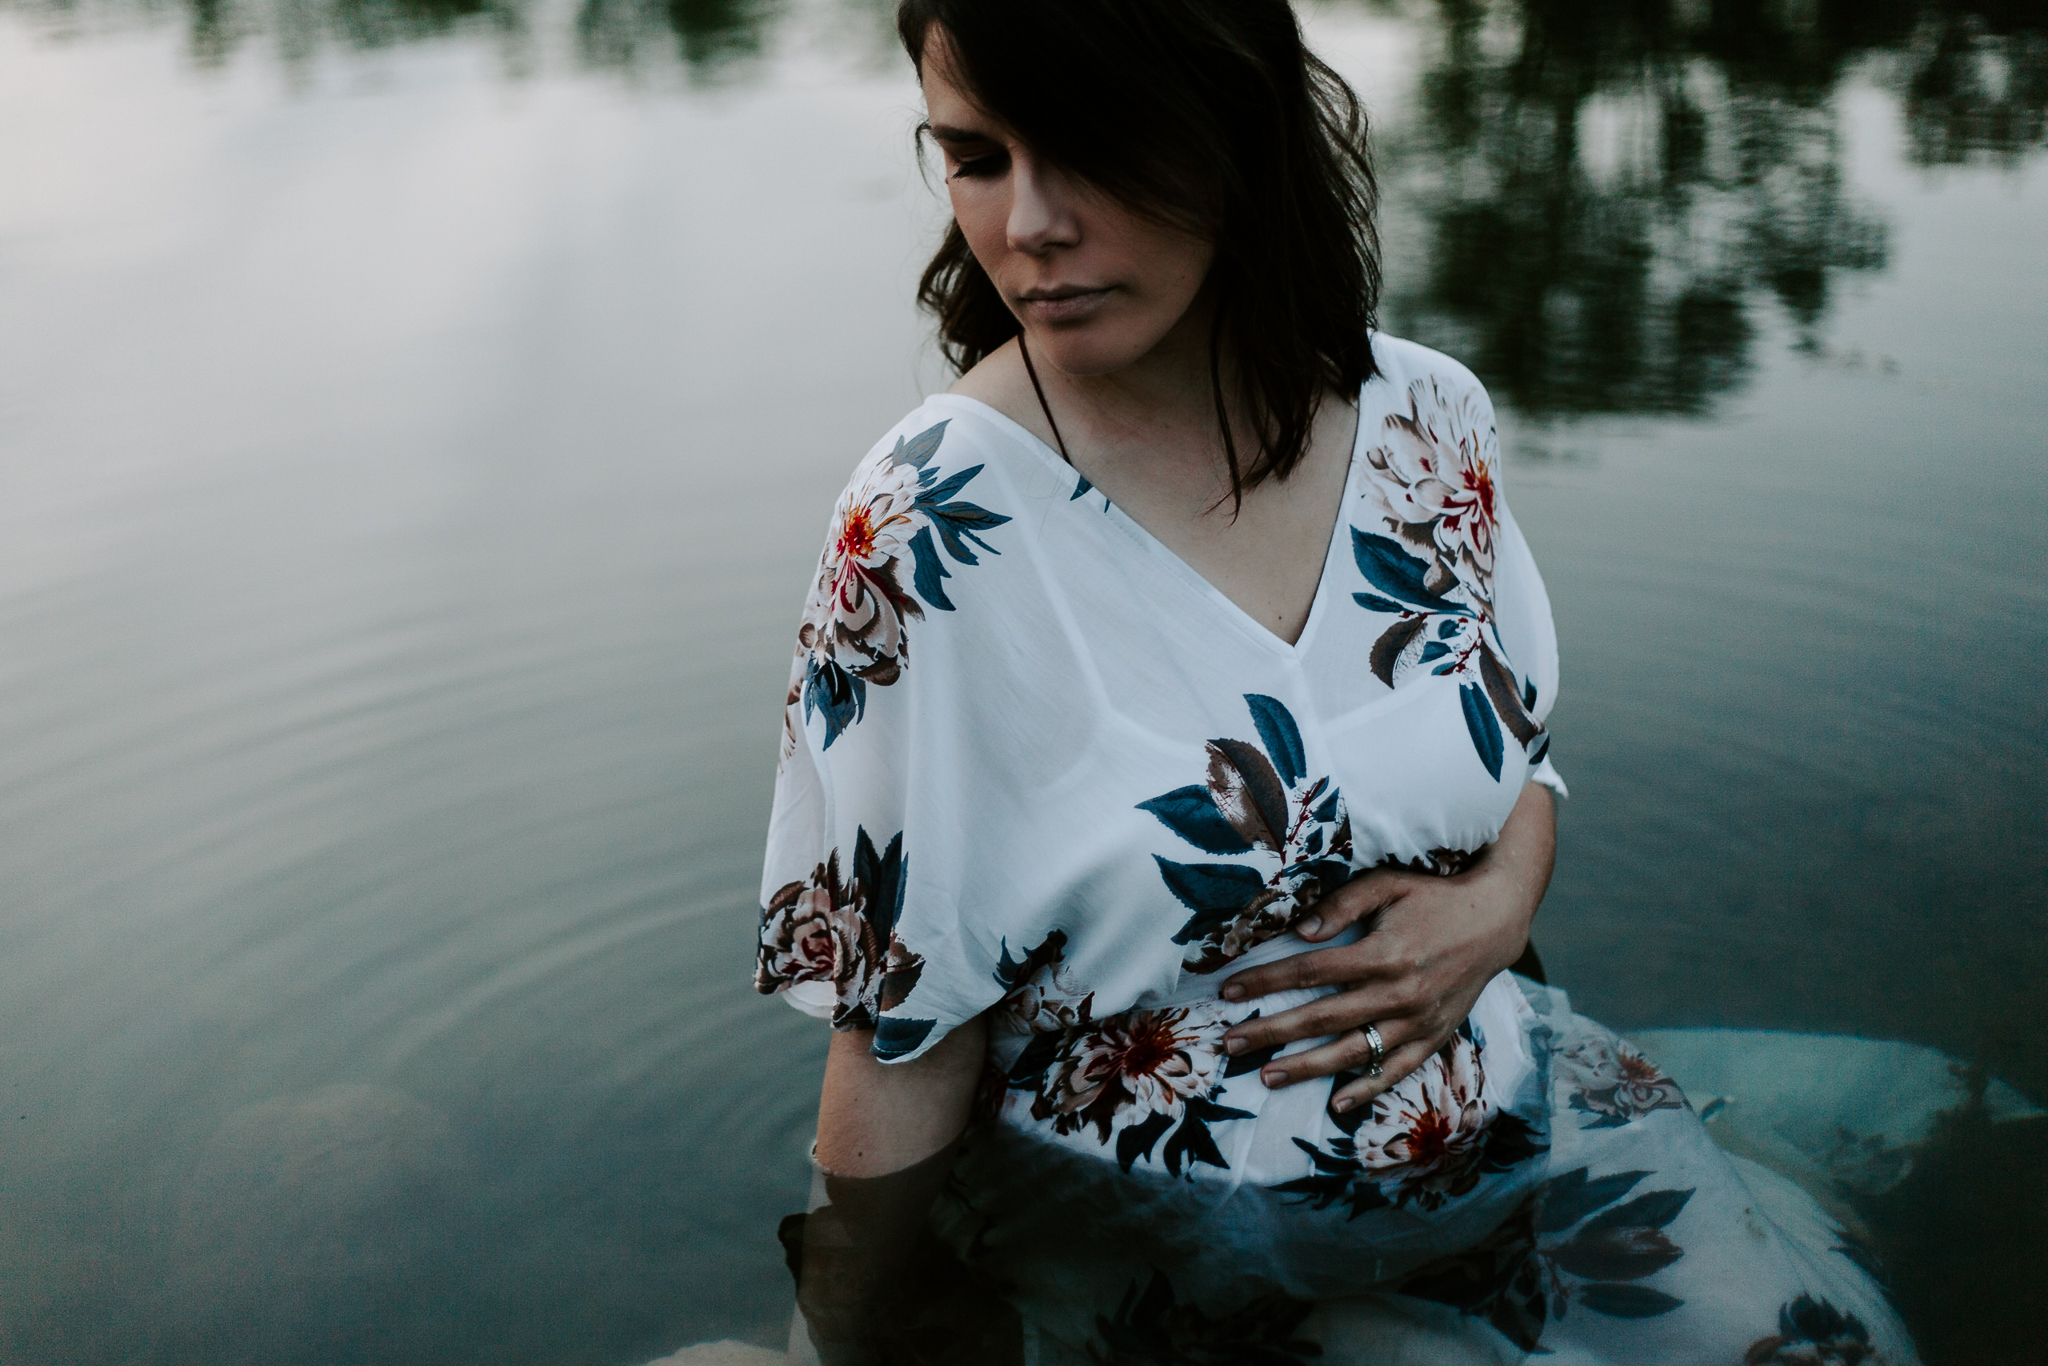 Expecing mother in a white floral dress sitting in pond at blue hour.